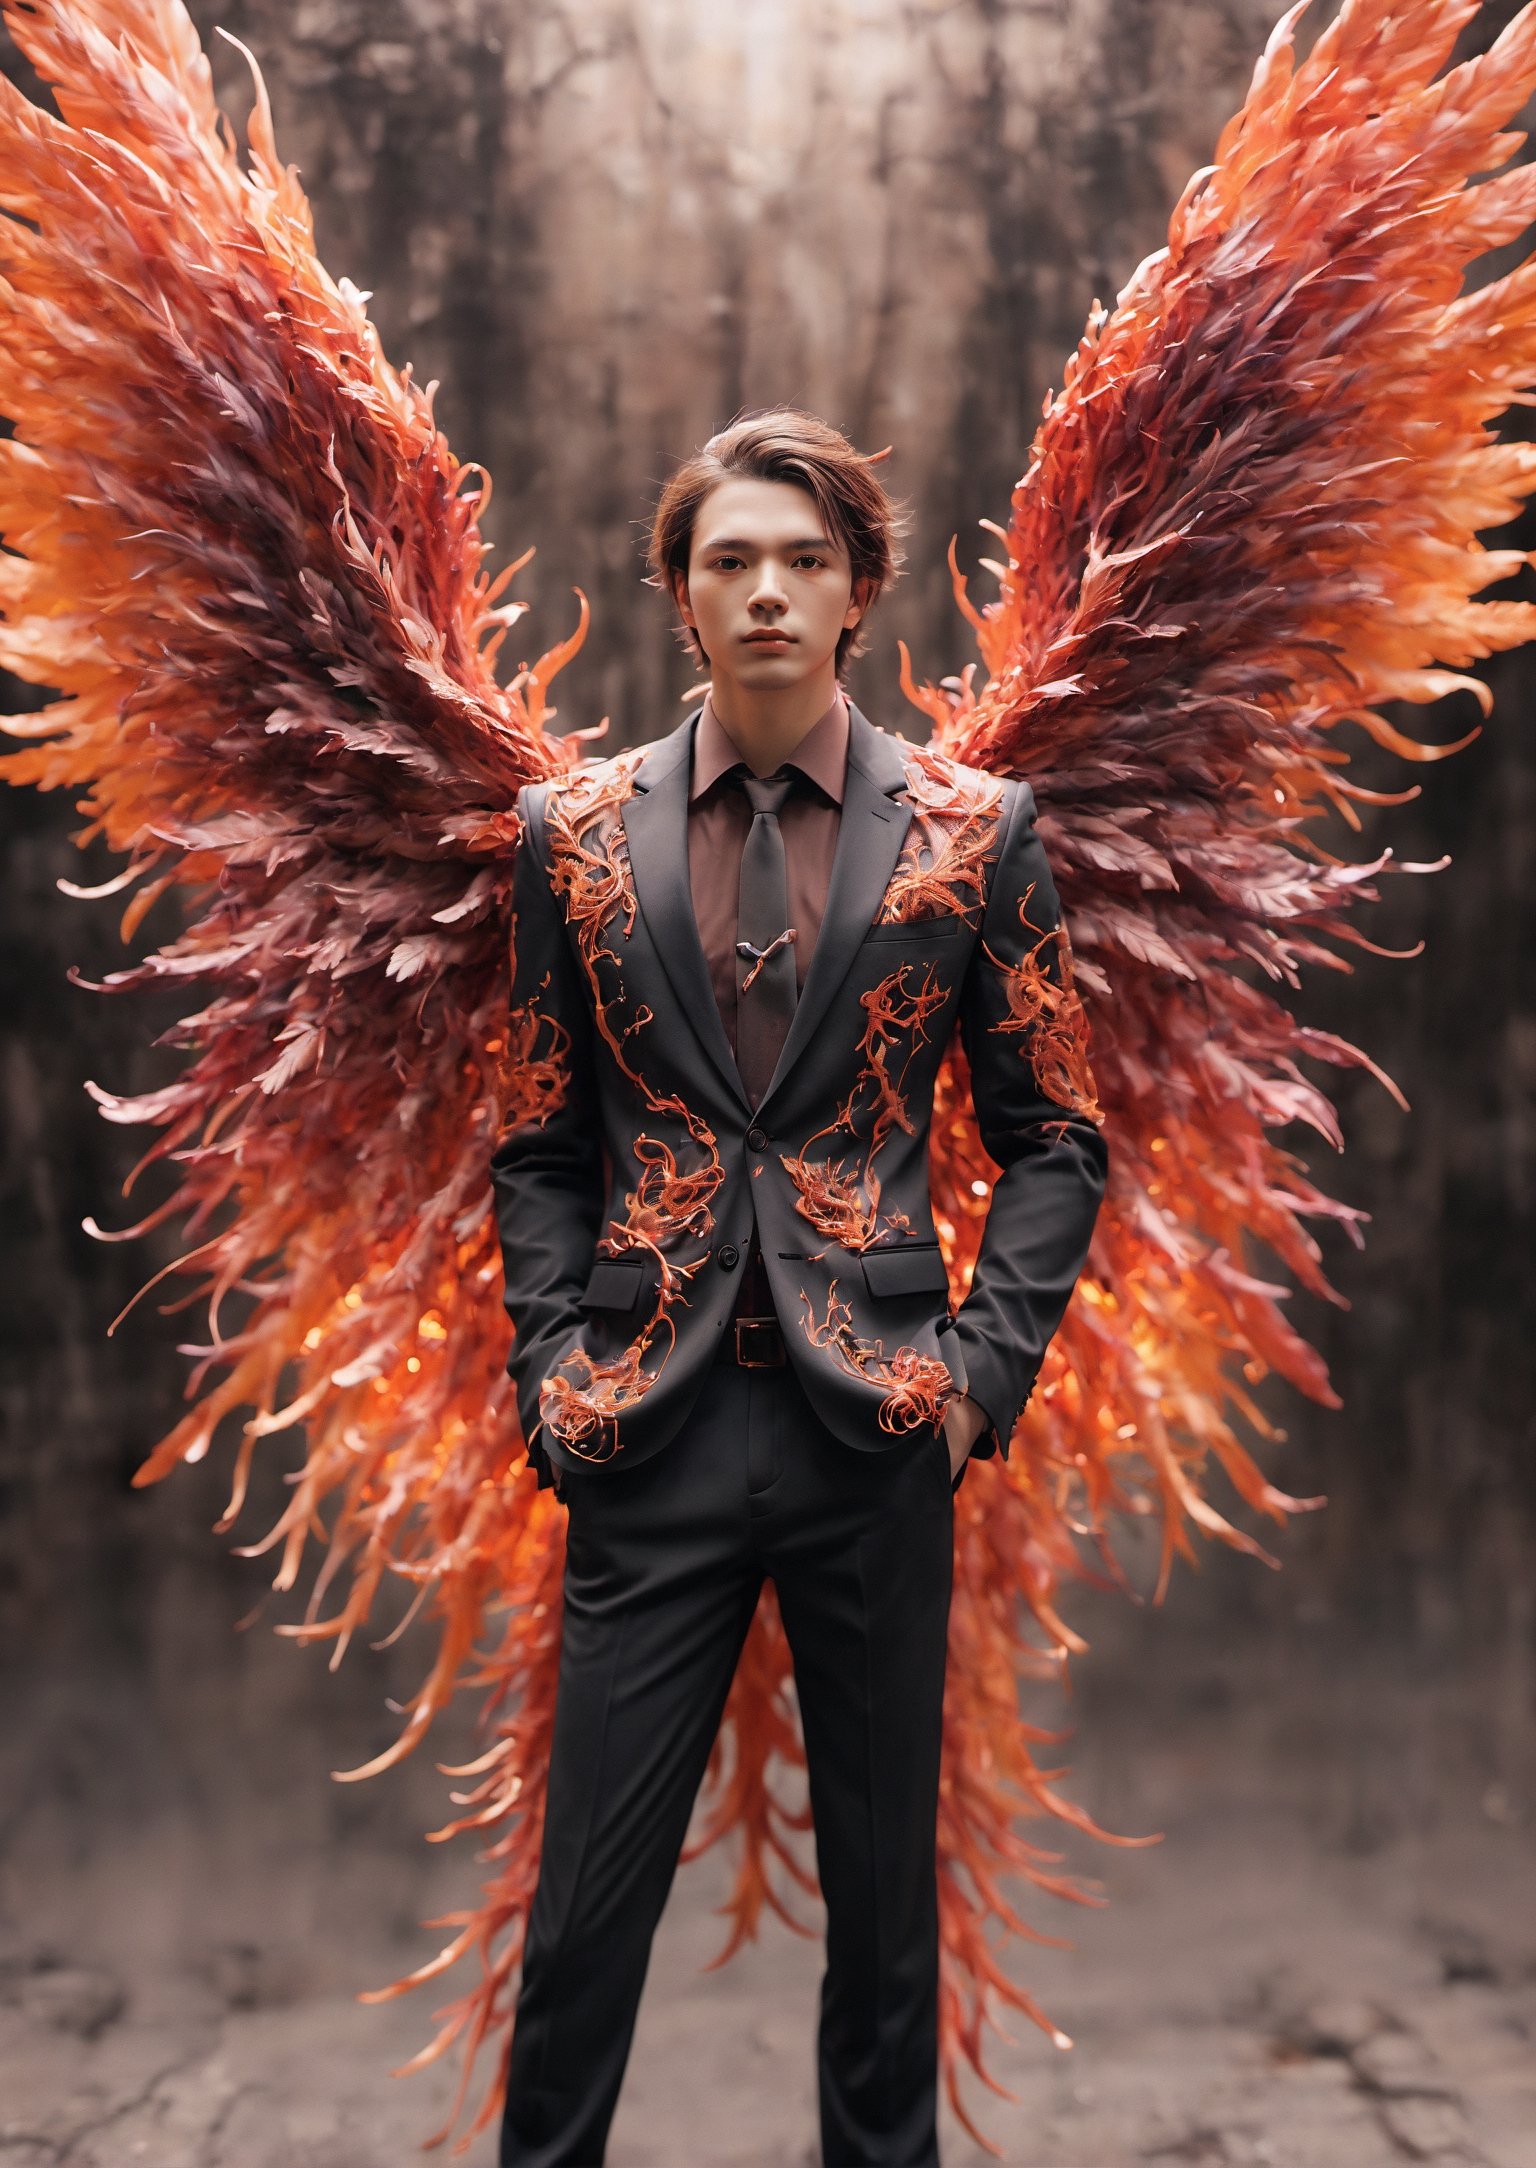 Create an image of a young man wearing a suit, featuring vibrant, fire and crystal wings extending from his back. Random movement The background should be plain white, emphasizing the contrast and detailing of the beauty wings and the sharpness of the suit. The man should appear poised and elegant, with the wings unfurled to showcase a spectrum of vivid hues, blending seamlessly from one color to another. The focus should be on the meticulous details of the wings’ feathers and the suit’s fabric, capturing a harmonious blend of natural and refined elements, wings,Stylish, close up,l3min,xxmixgirl